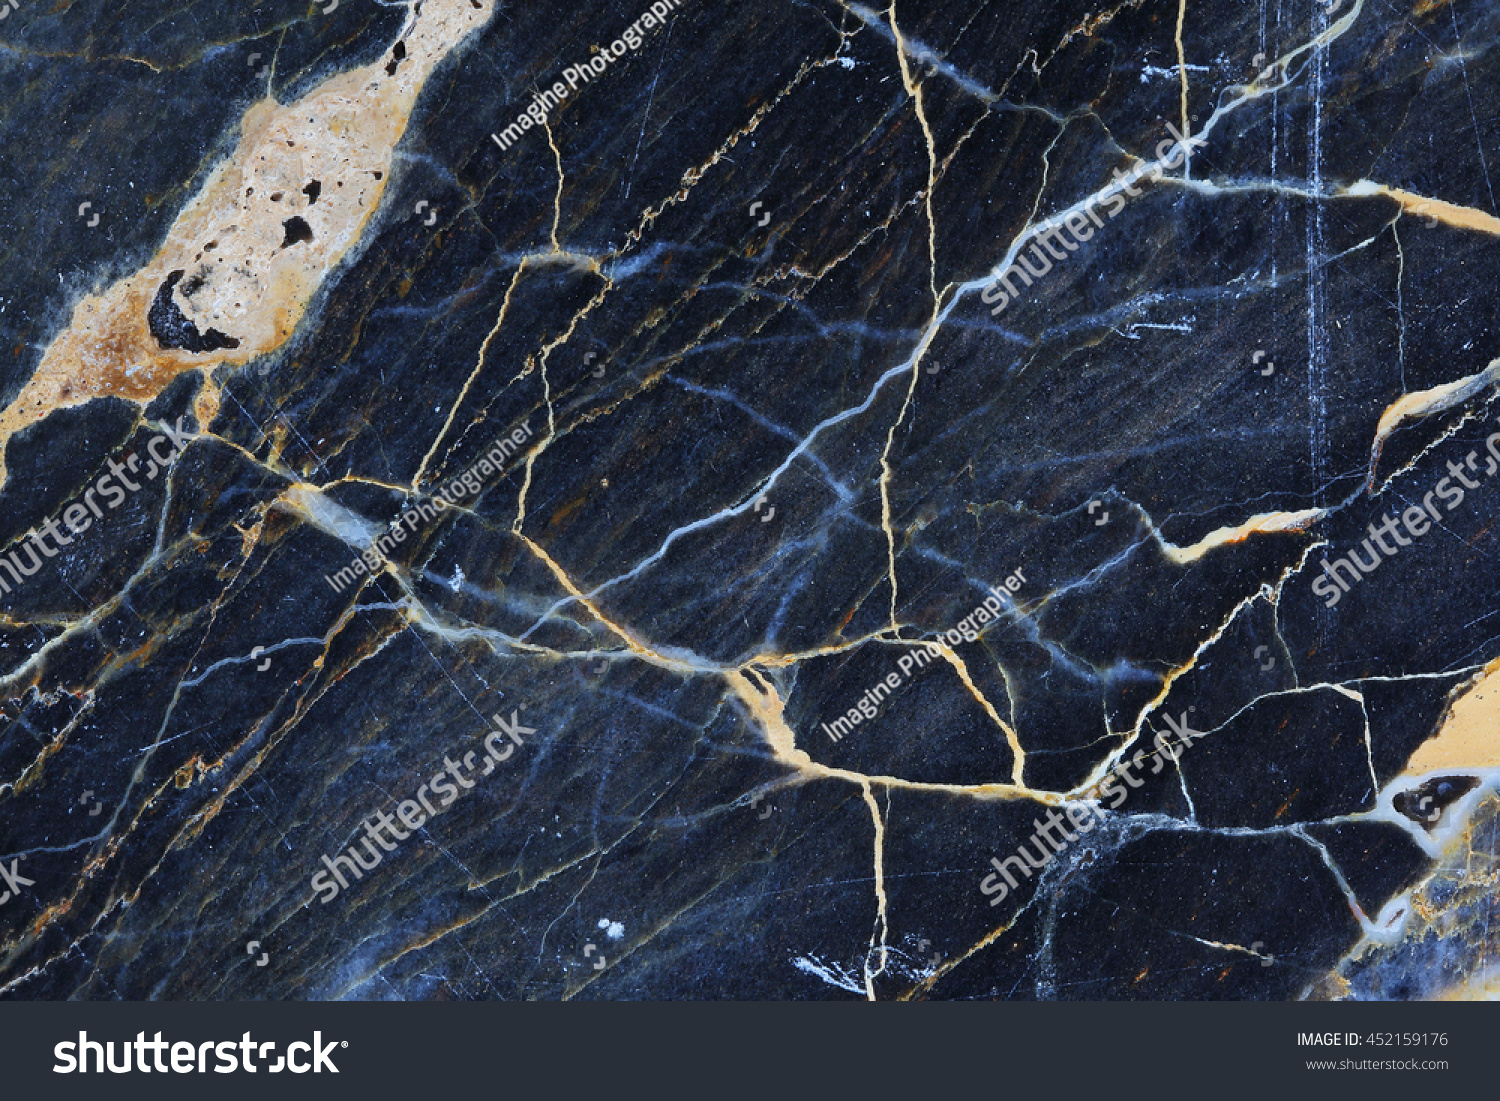 Gold, yellow and white patterned natural structure of dark gray blue marble texture background. #452159176